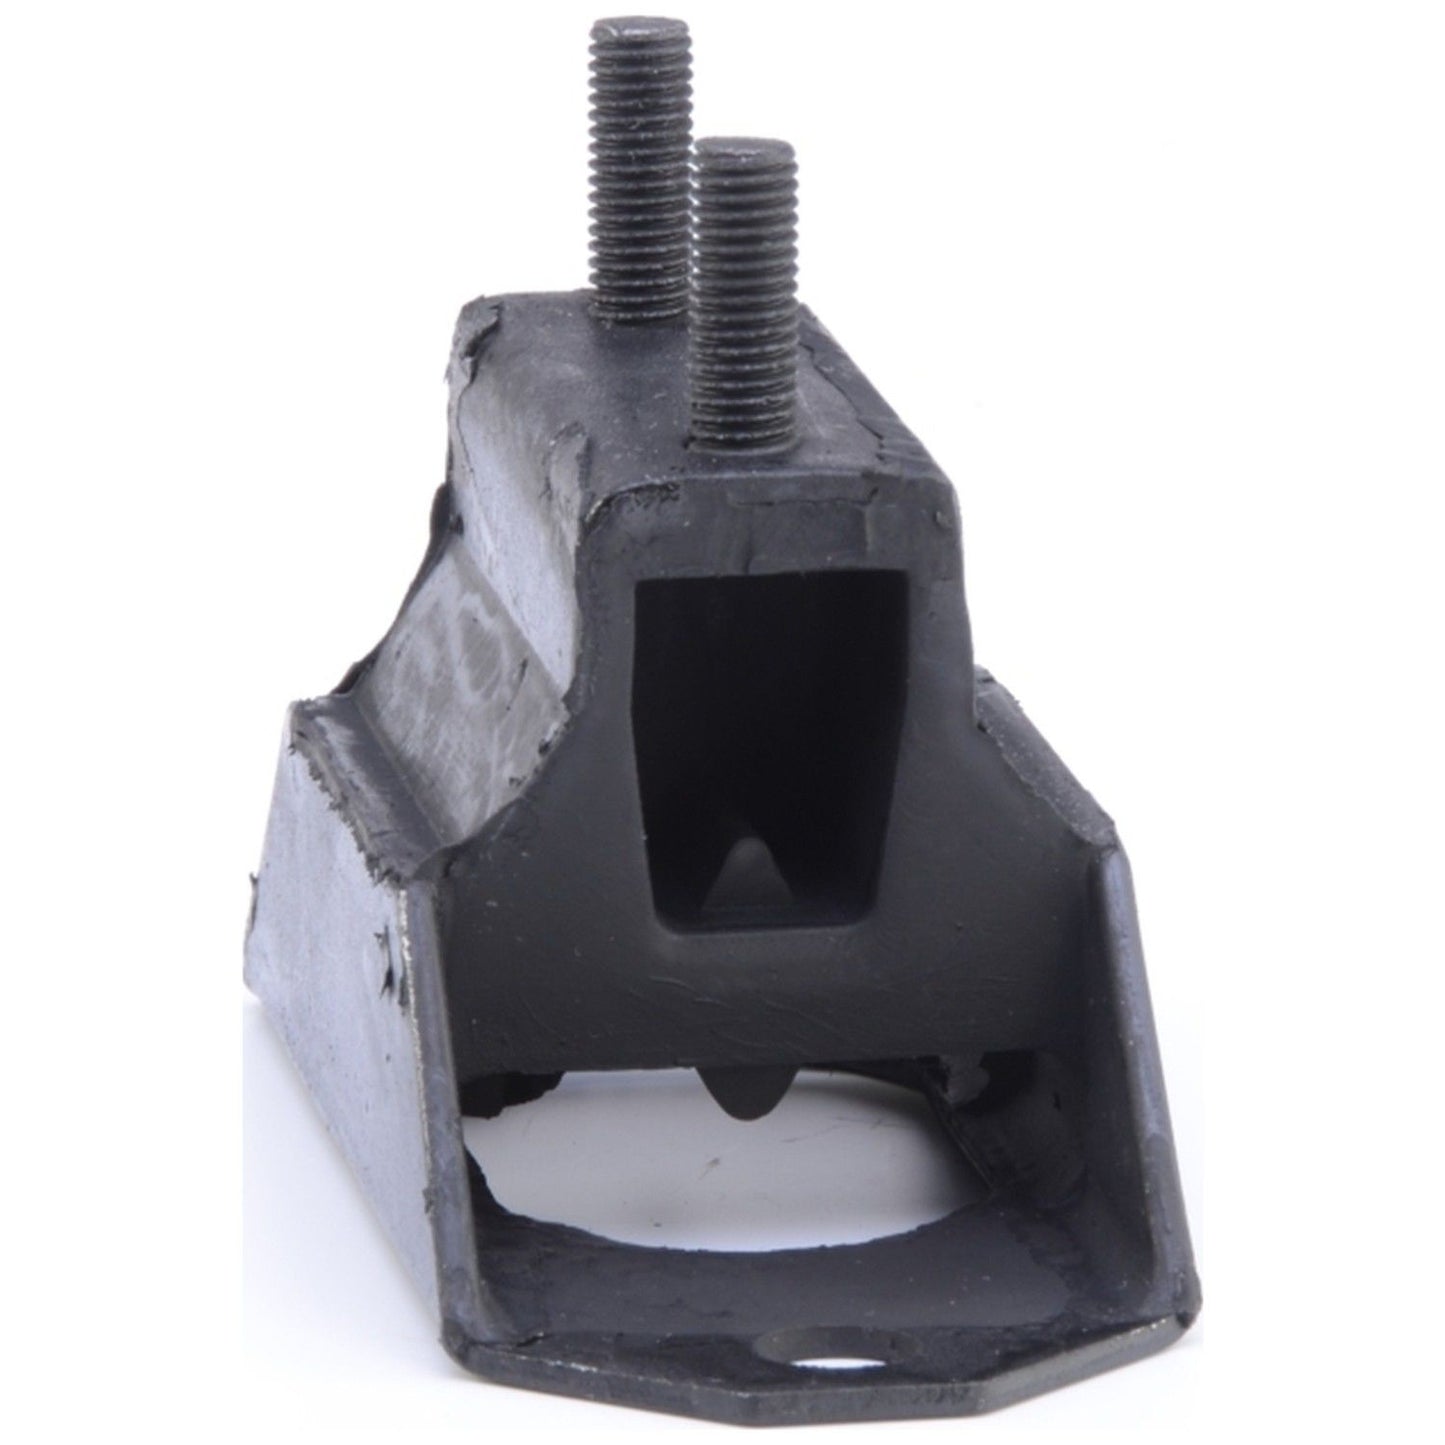 Left View of Rear Automatic Transmission Mount ANCHOR 2784